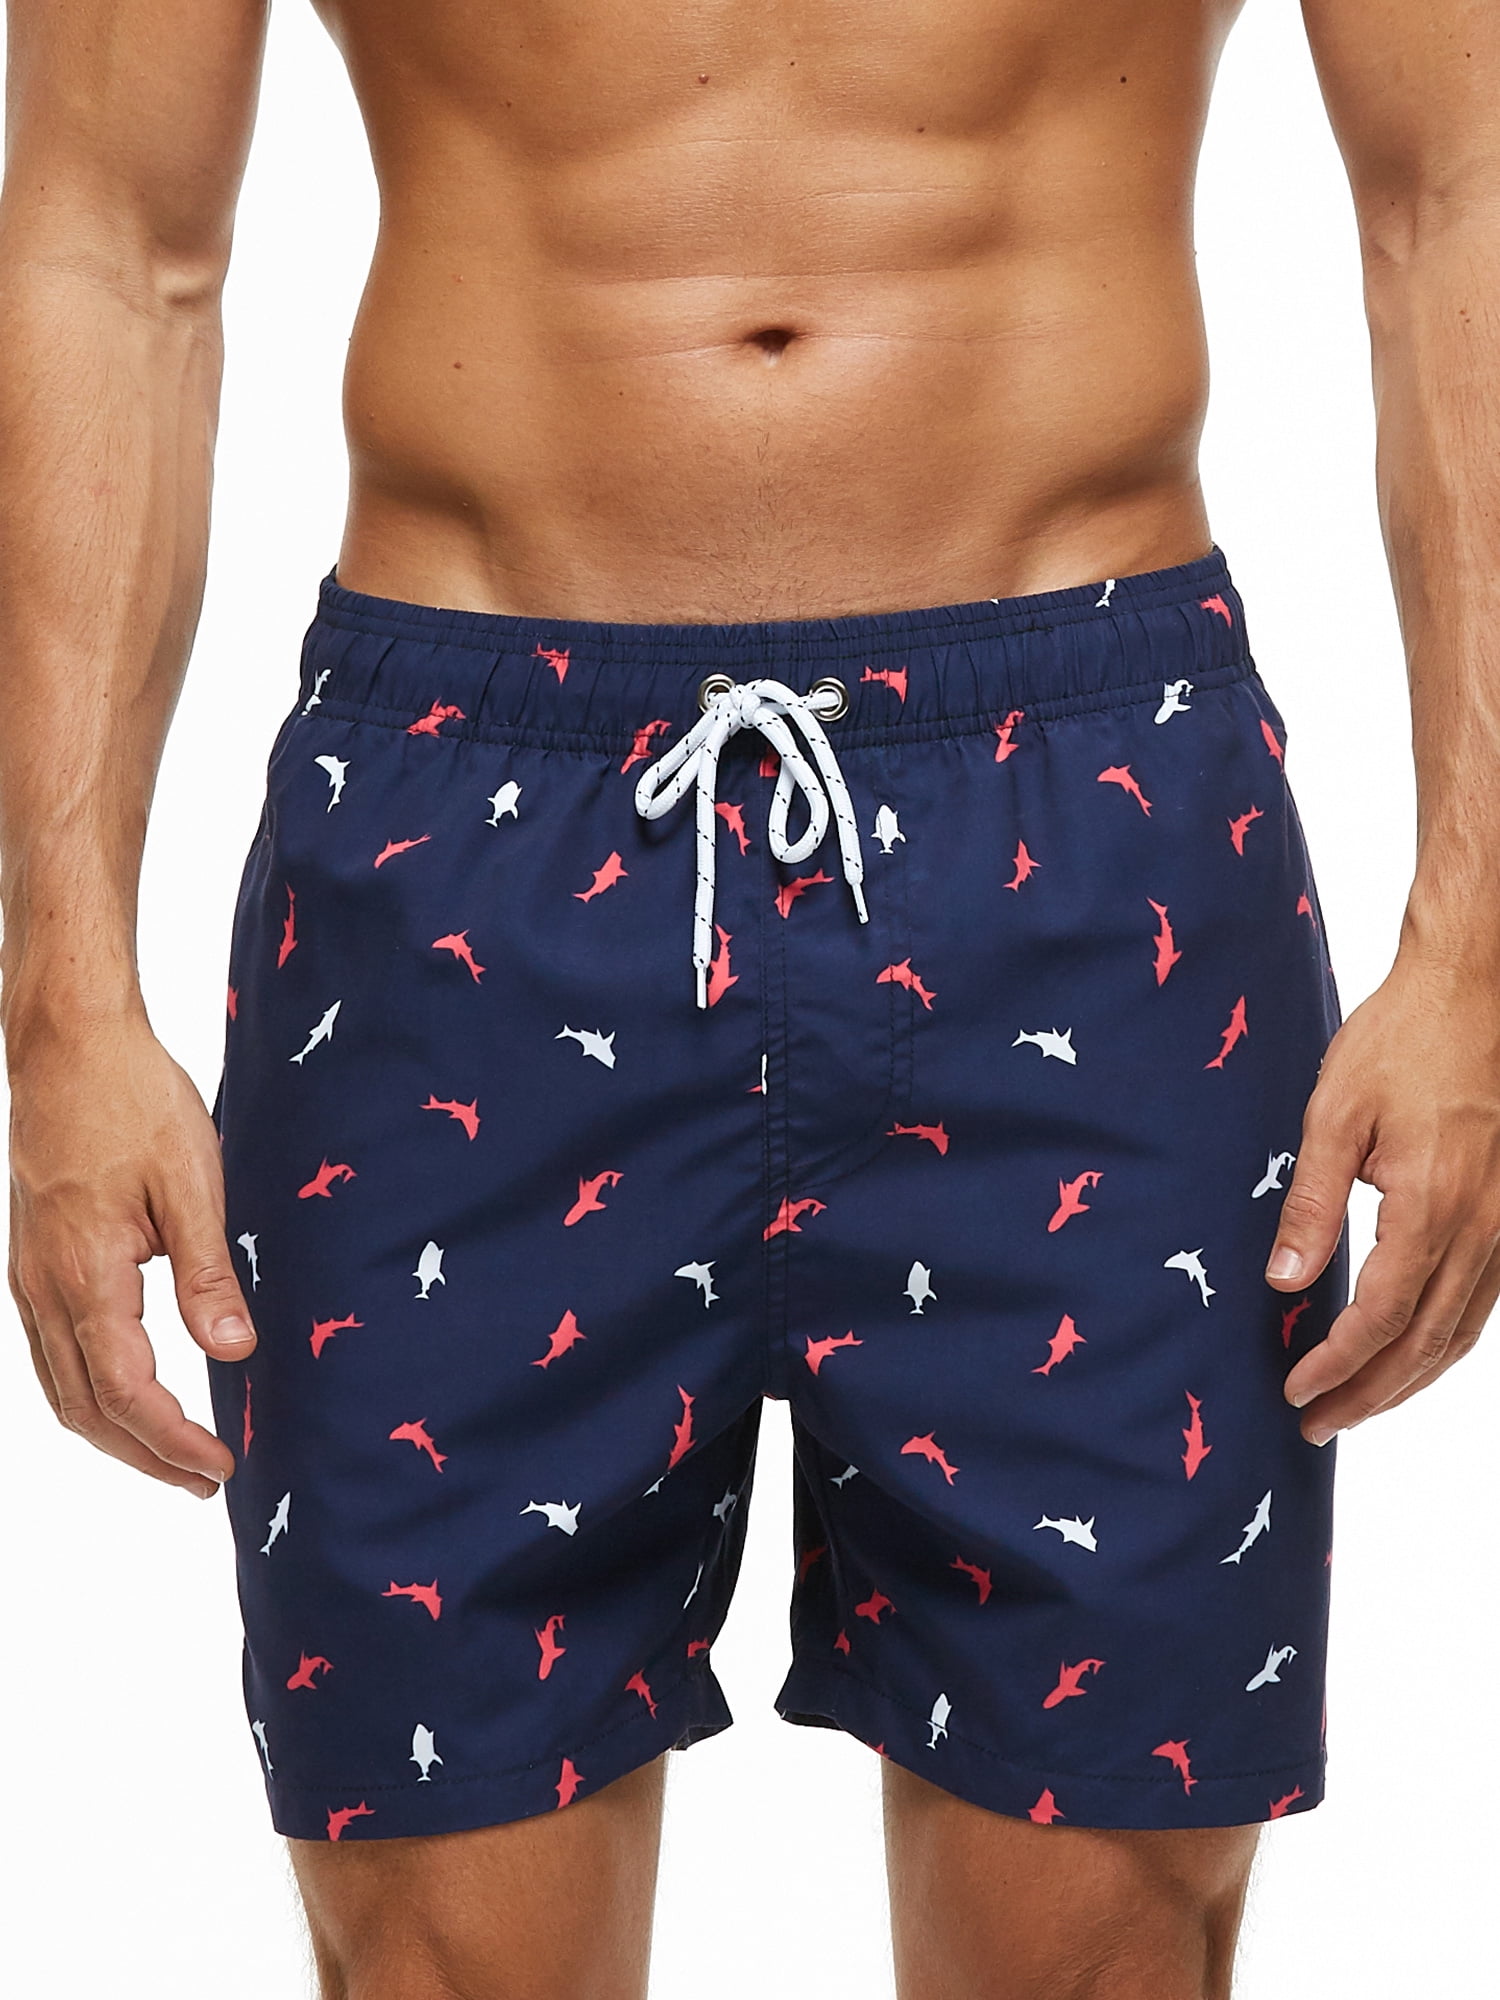 Cute Red Chili Peppers Mens Swim Trunks Quick Dry Board Shorts with Pockets Summer Swimsuit Beach Short